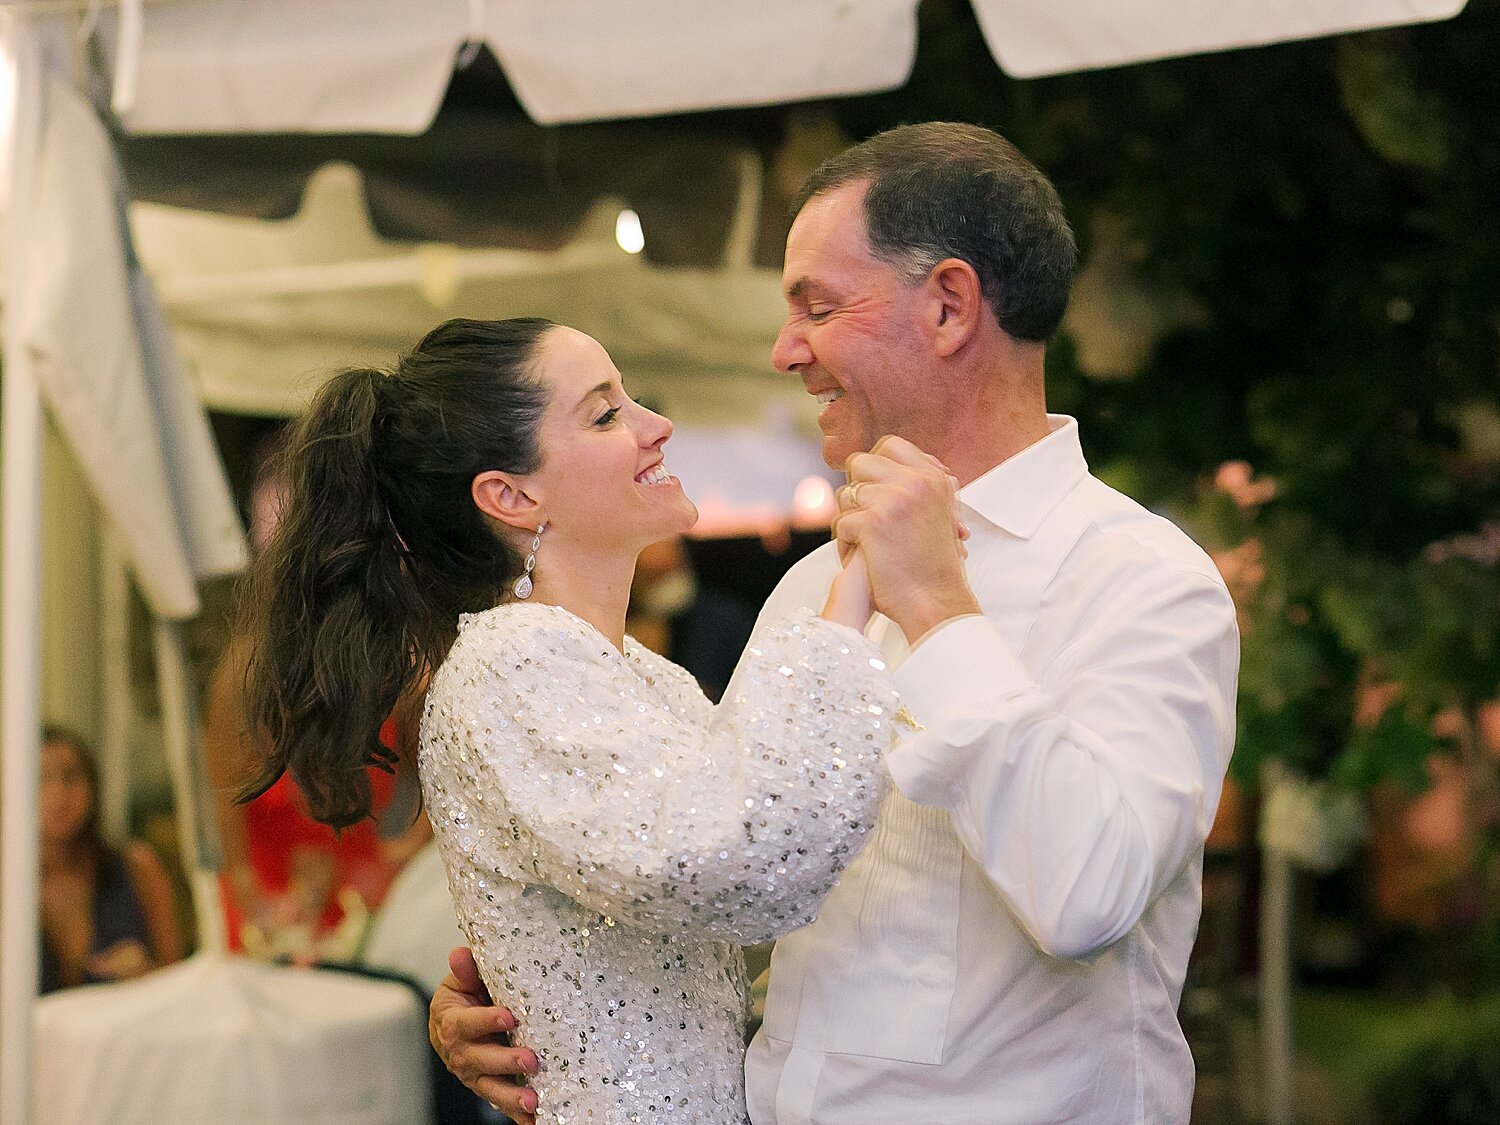 bride dances with dad during private home wedding | Stylish Private Home Wedding Inspiration | Asher Gardner Photography